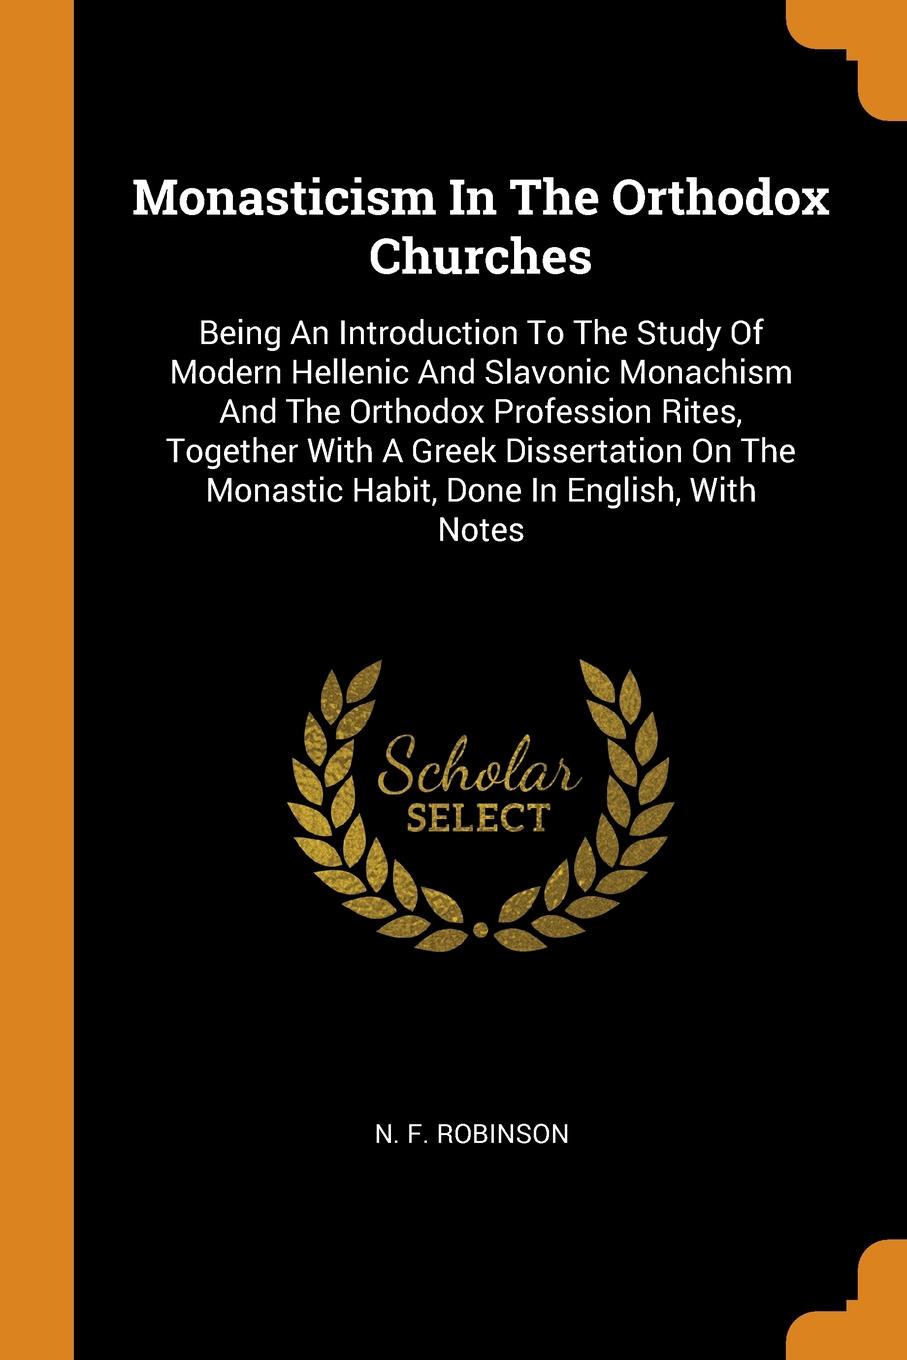 Monasticism In The Orthodox Churches. Being An Introduction To The Study Of Modern Hellenic And Slavonic Monachism And The Orthodox Profession Rites, Together With A Greek Dissertation On The Monastic Habit, Done In English, With Notes